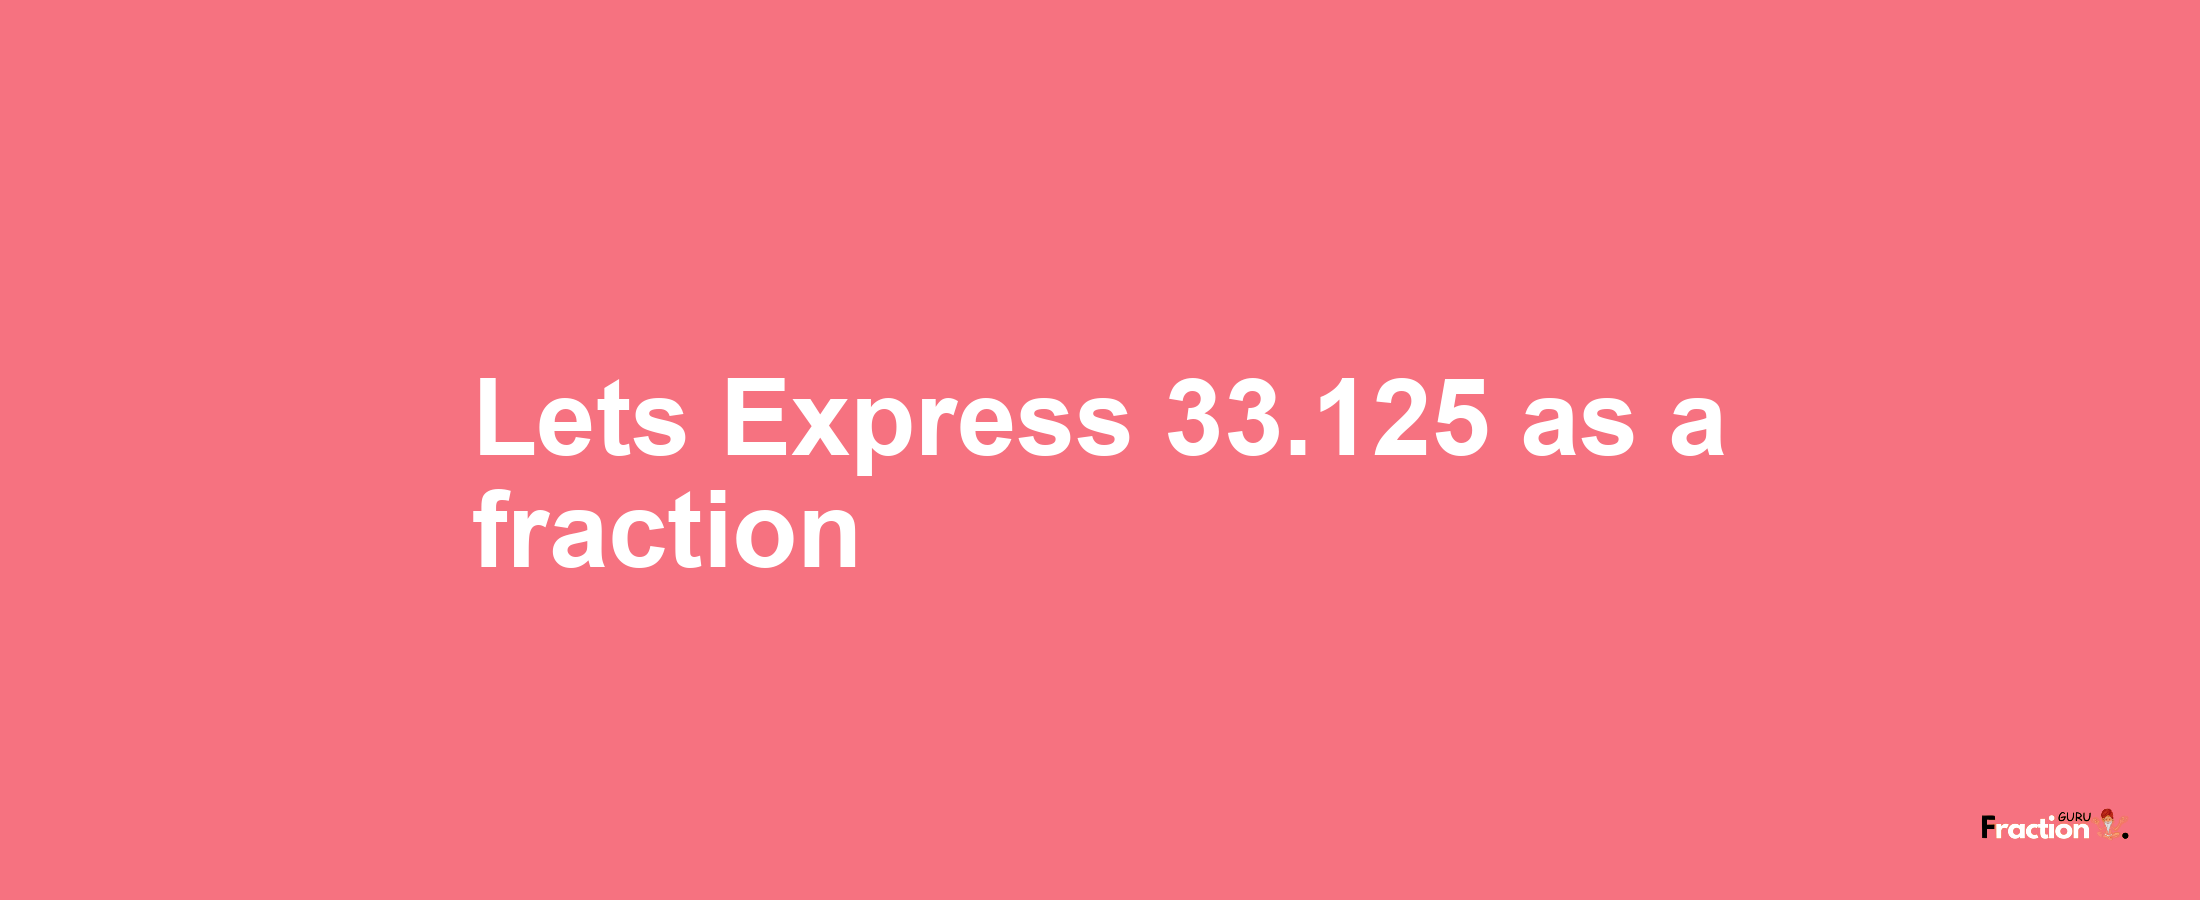 Lets Express 33.125 as afraction